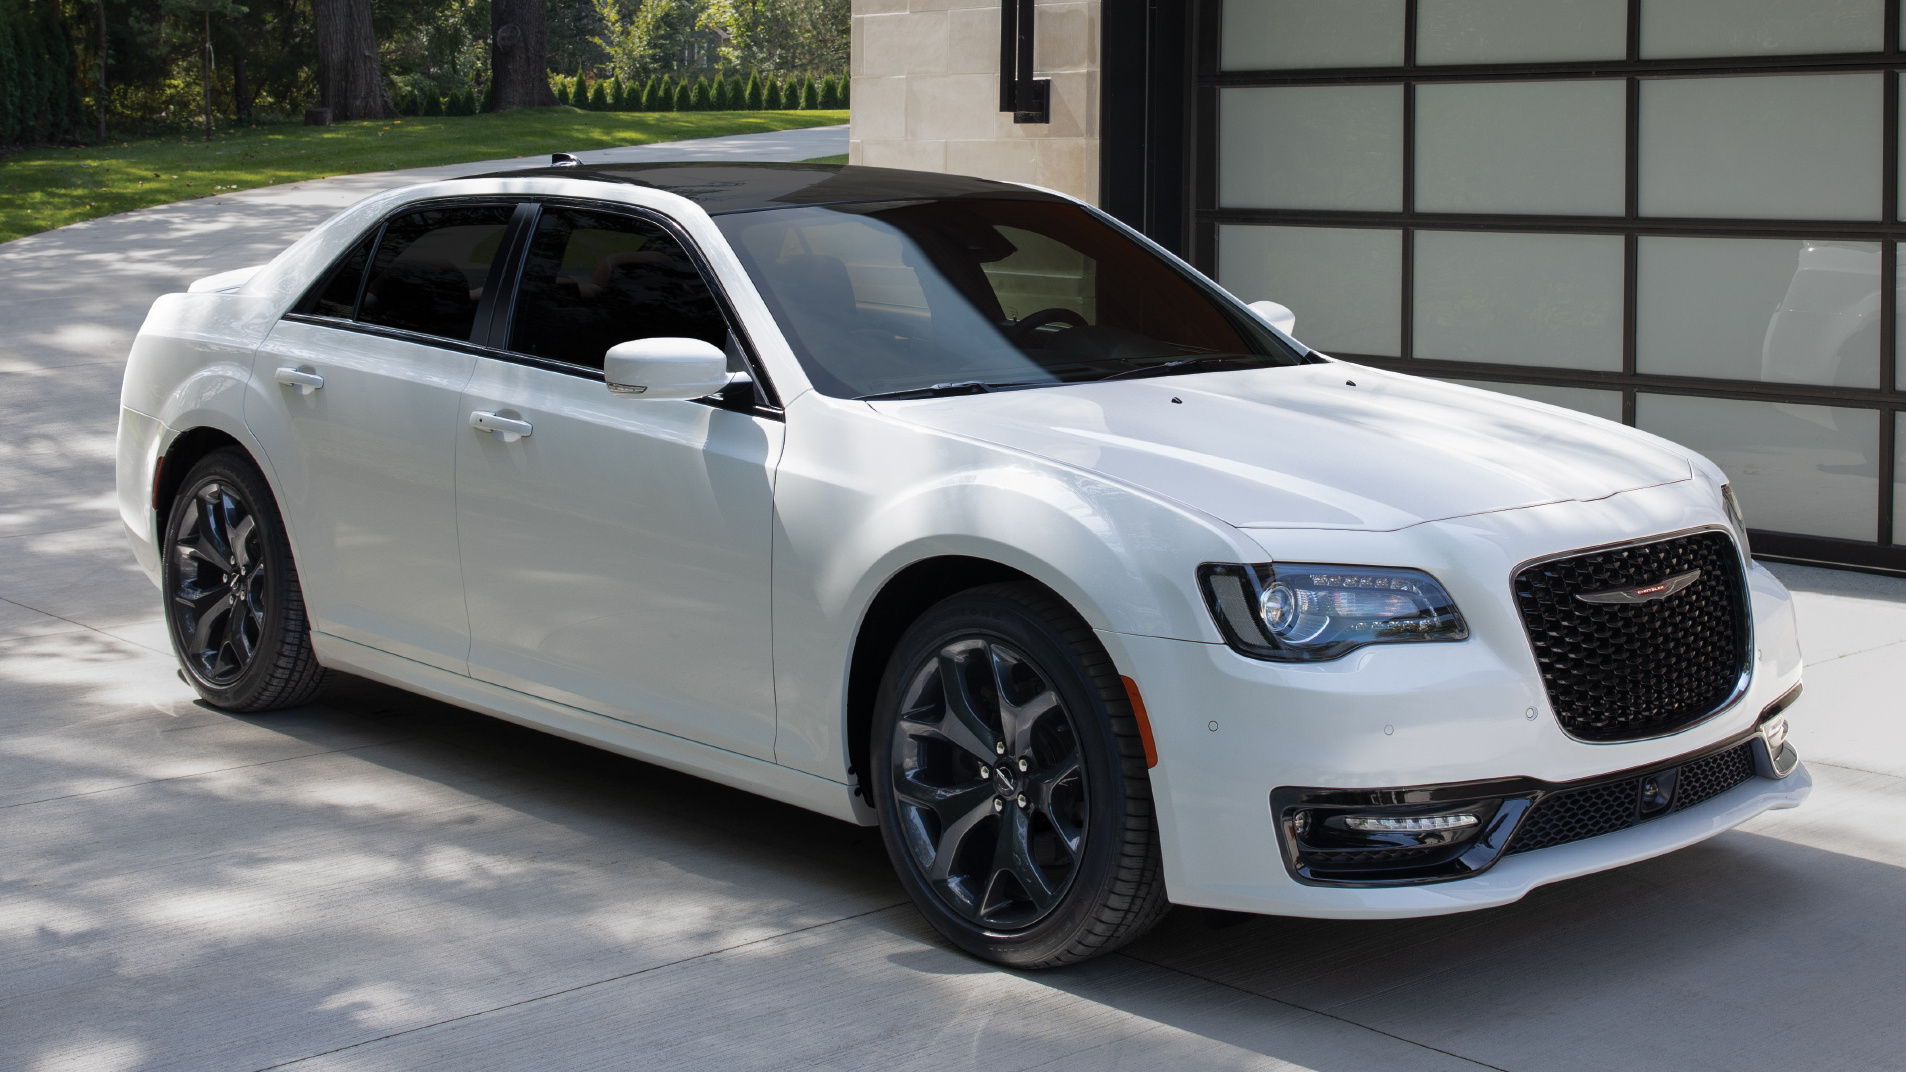 We Get A Sneak Peek At The Pricing For The 2023 Chrysler 300 Series! -  MoparInsiders